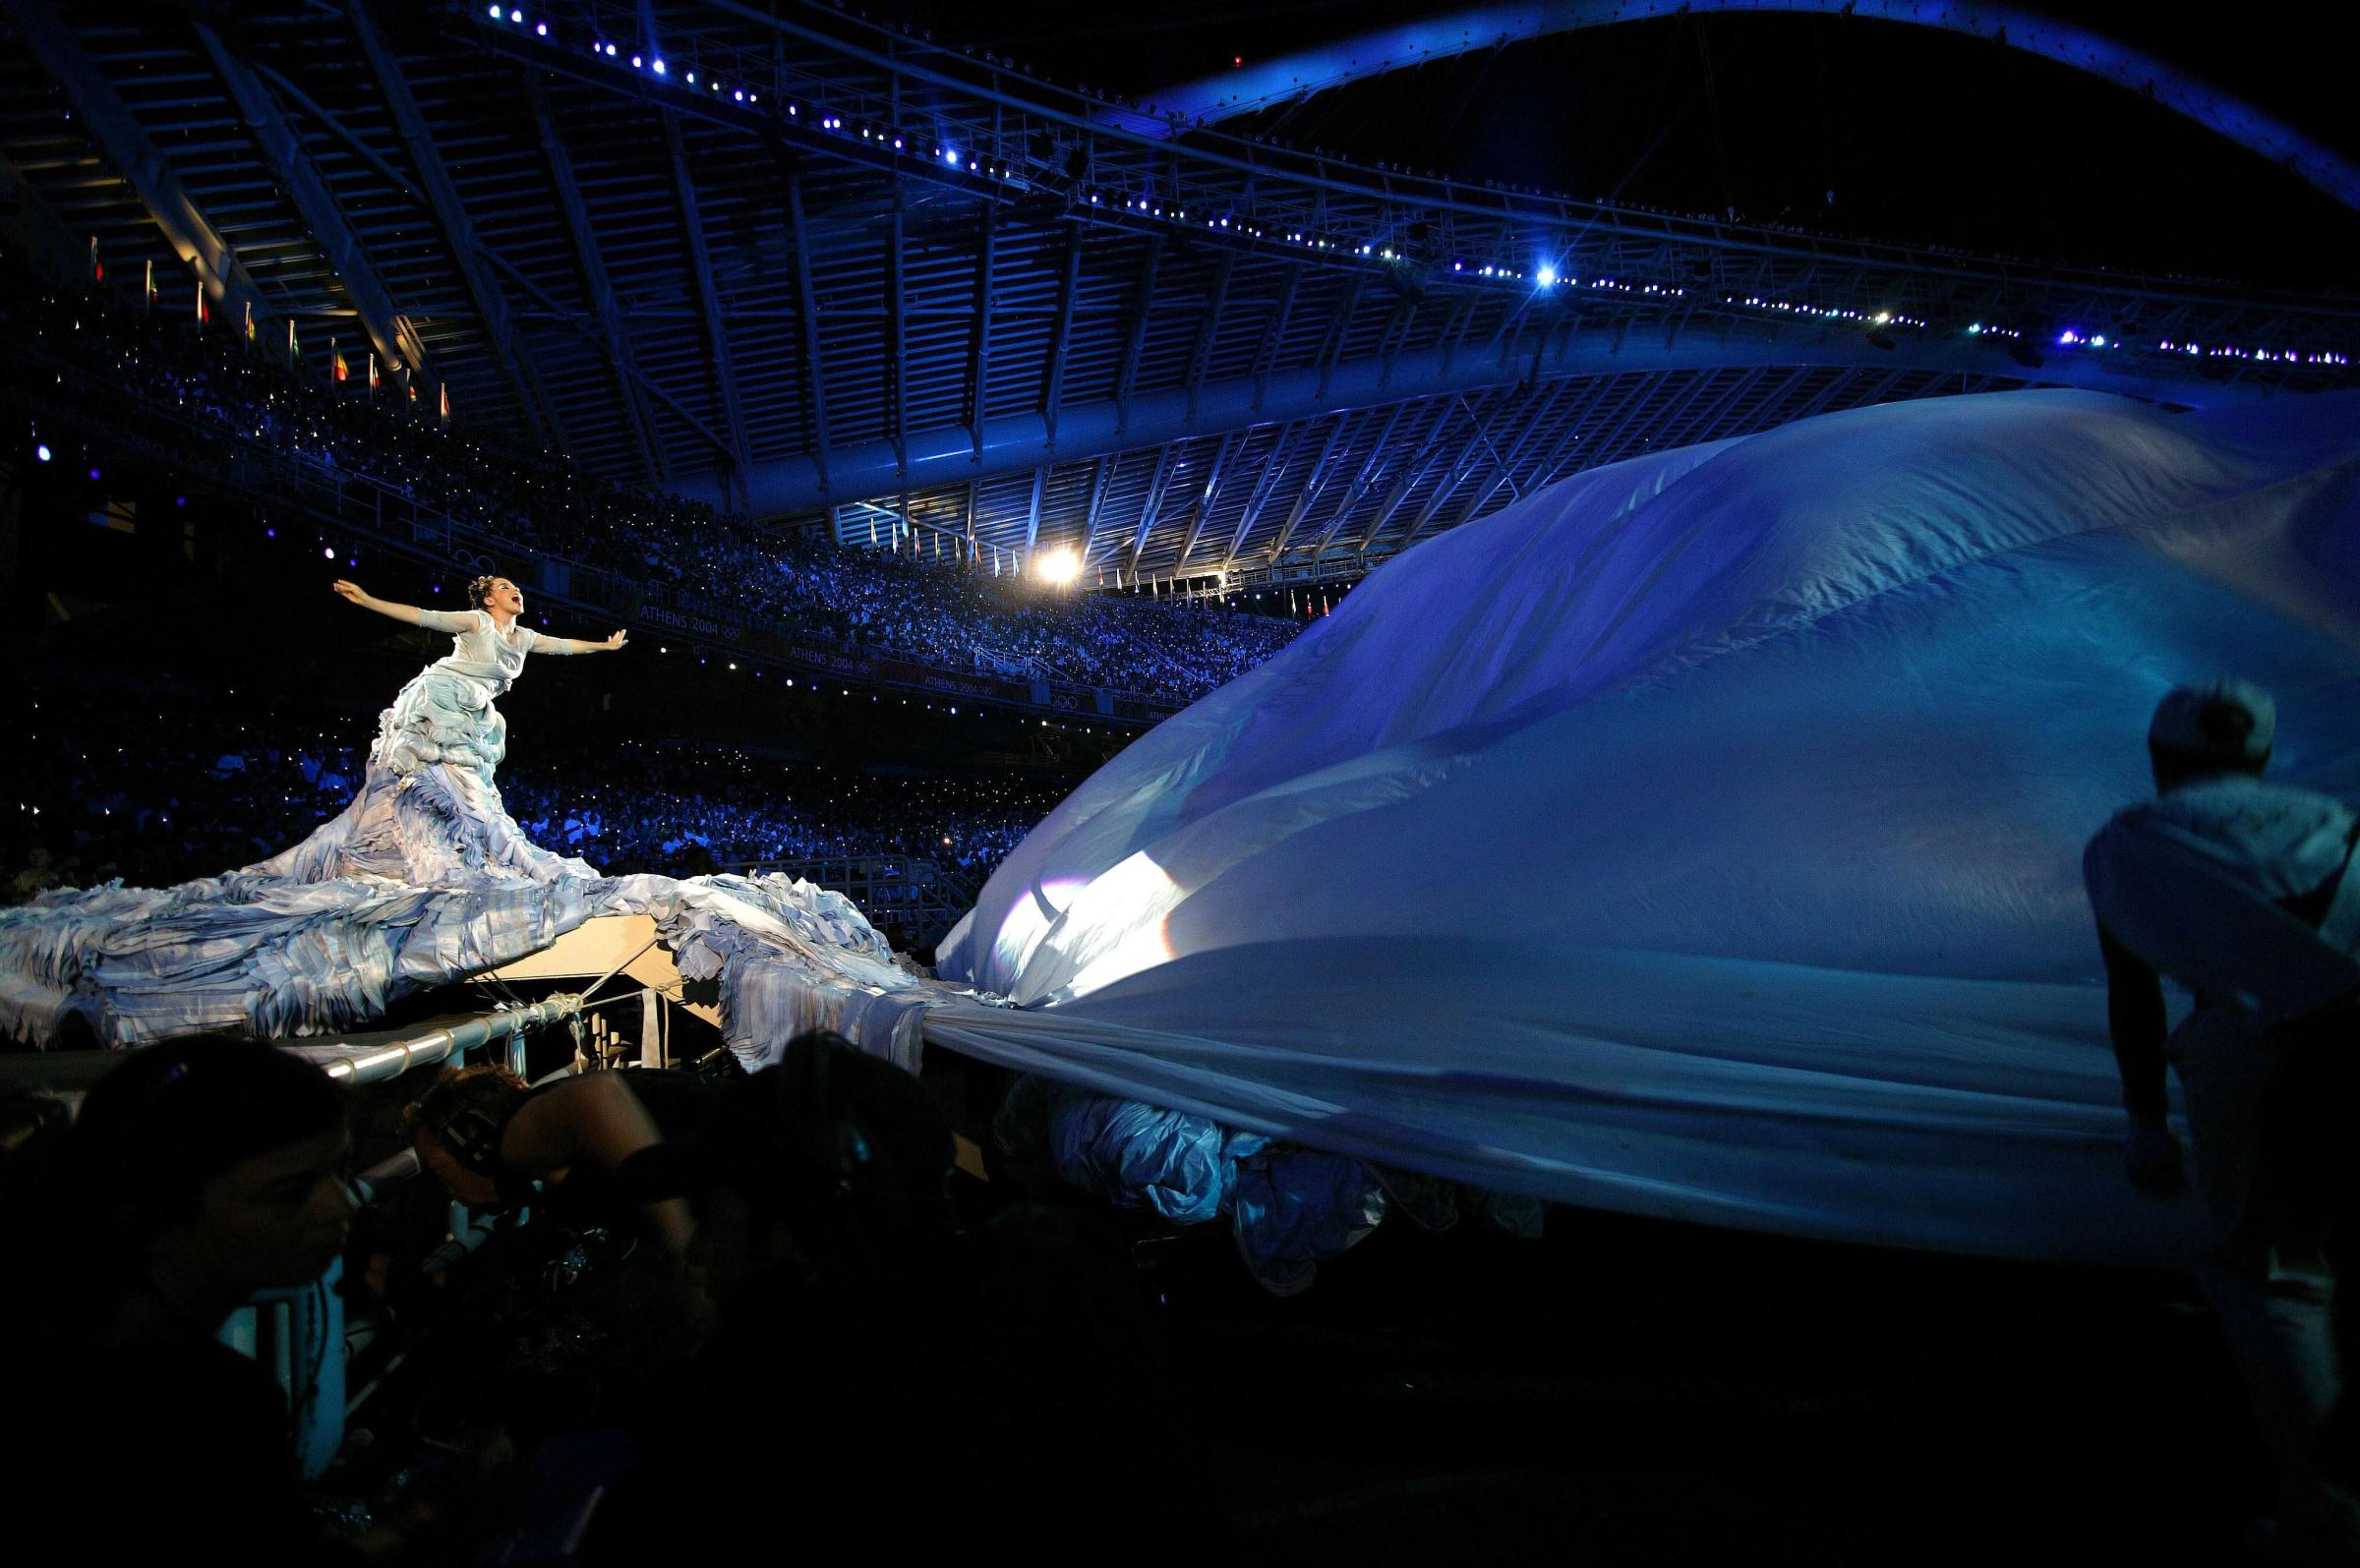 Björk performs onstage at the opening of the 2004 Athens Olympics in Athens, Greece on Aug. 13, 2004.